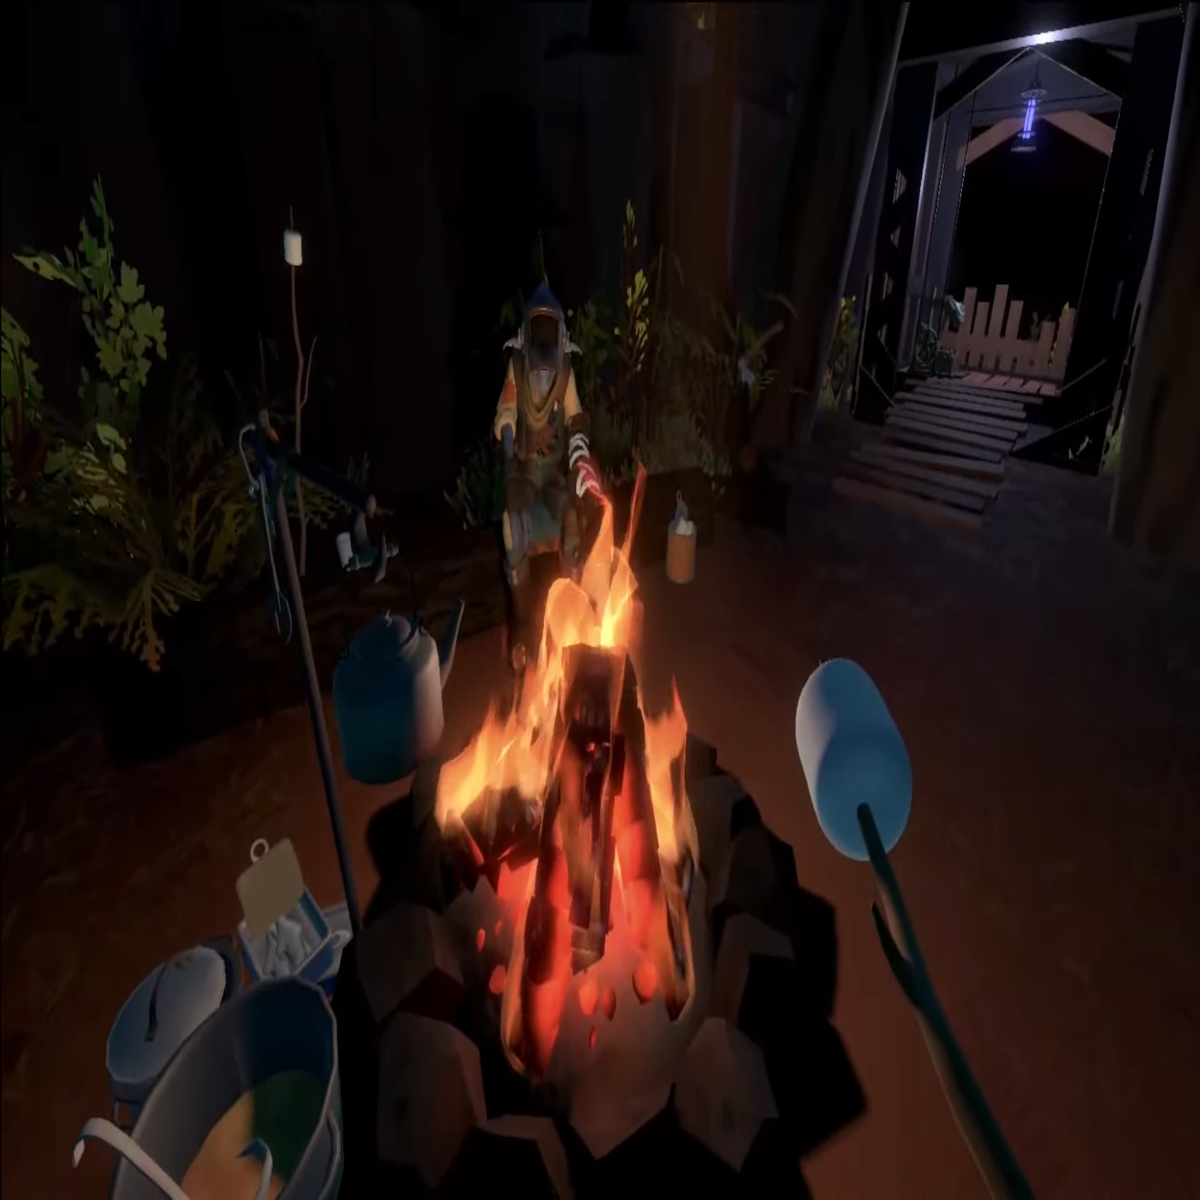 Outer Wilds on Nintendo Switch is near, fans believe - Video Games